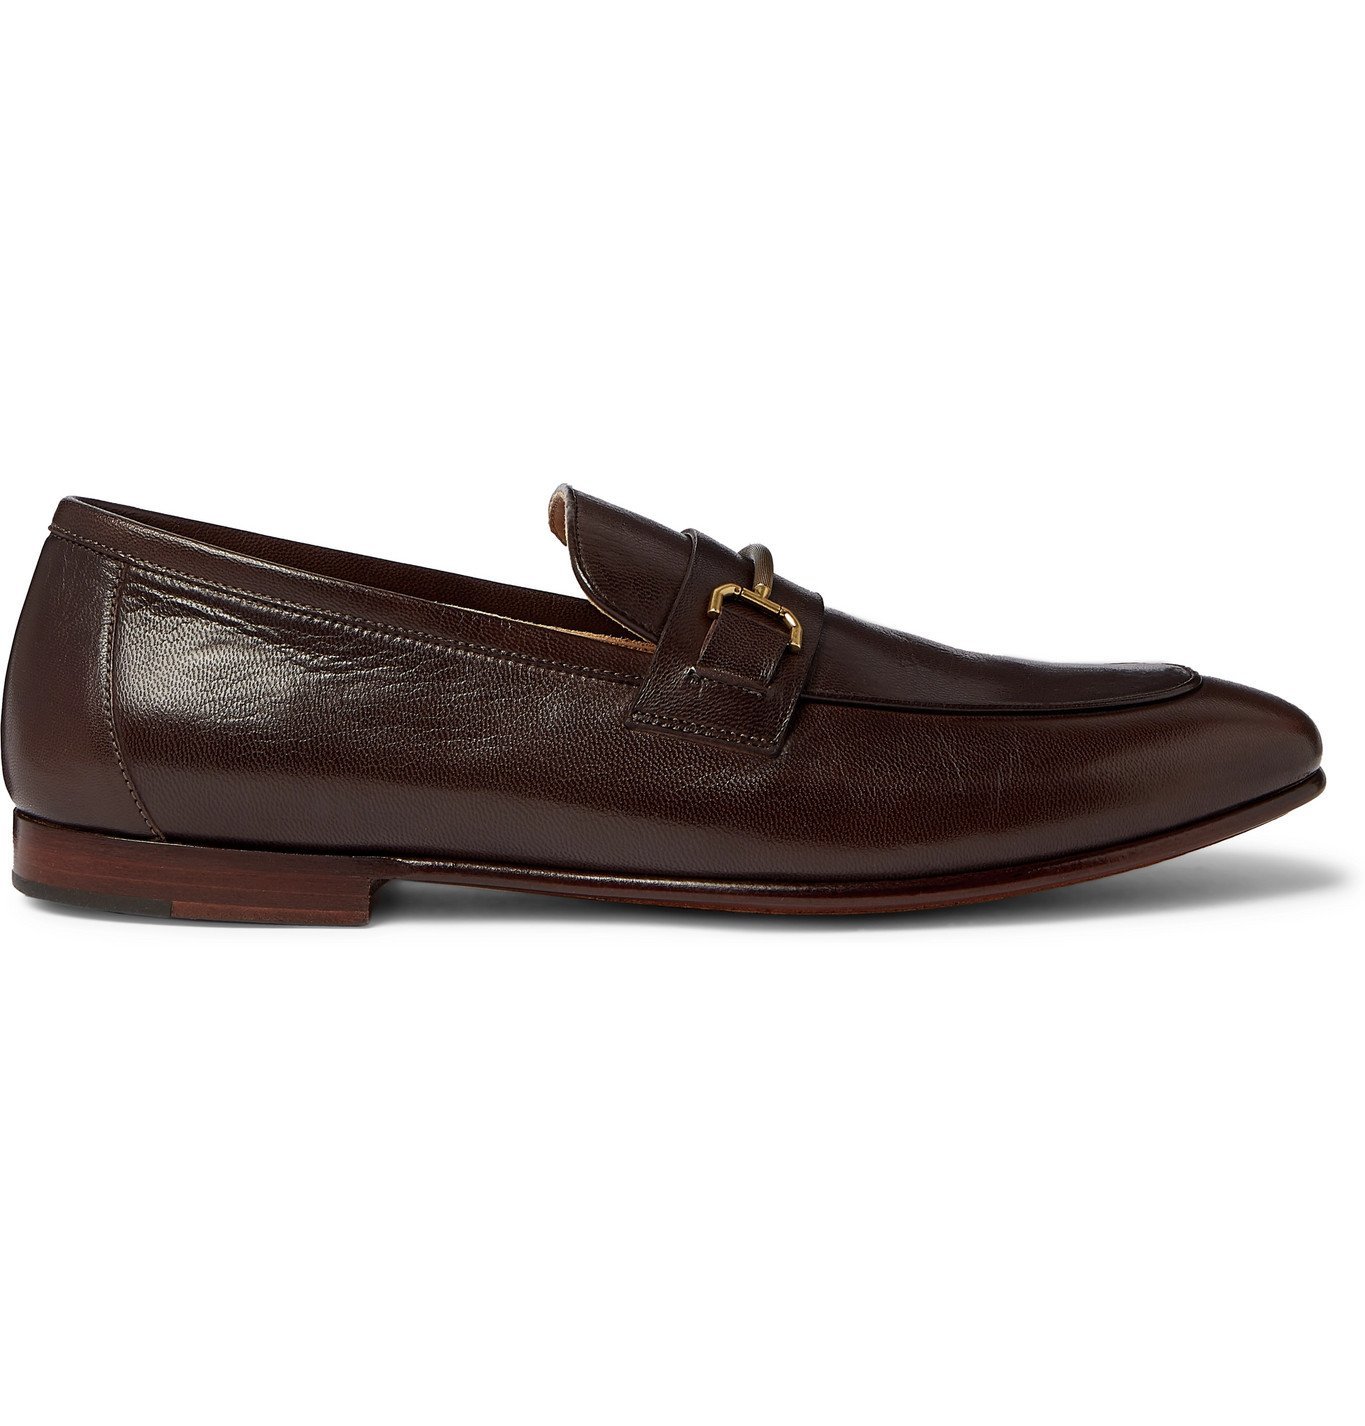 Dunhill - Chiltern Leather Loafers - Brown Dunhill